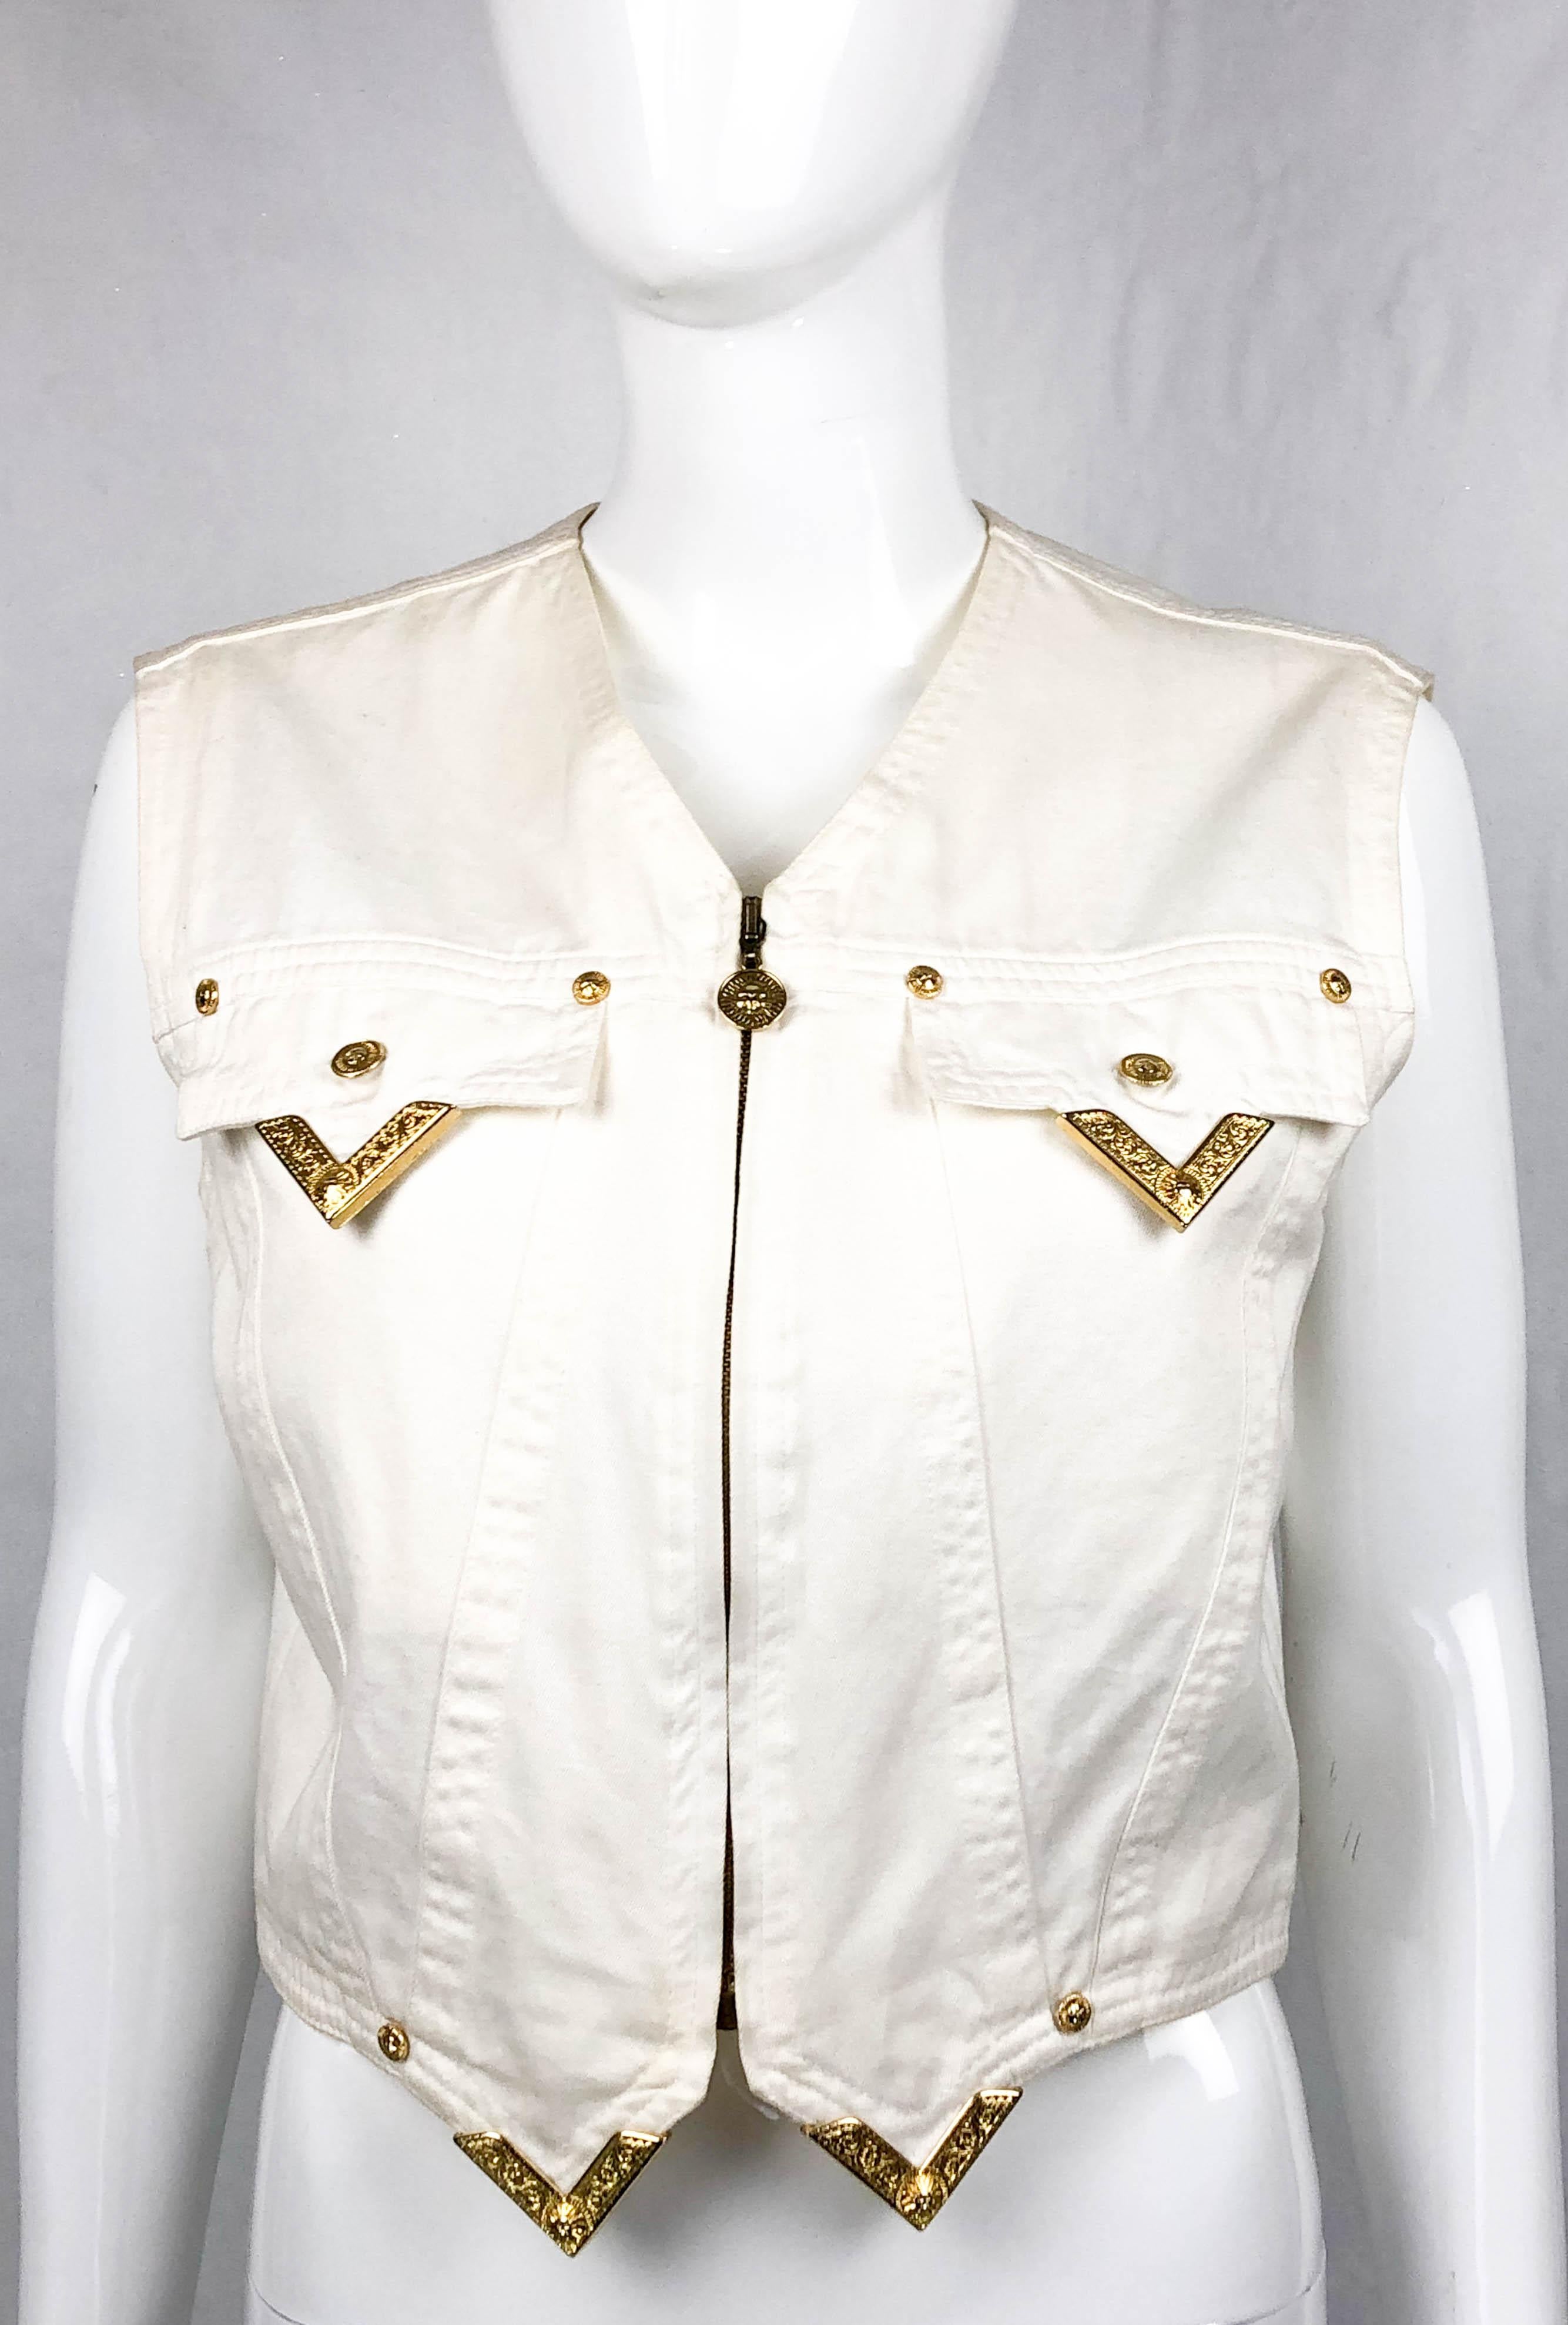 1991 Gianni Versace White Denim Waistcoat With Gilt Tips In Excellent Condition For Sale In London, Chelsea